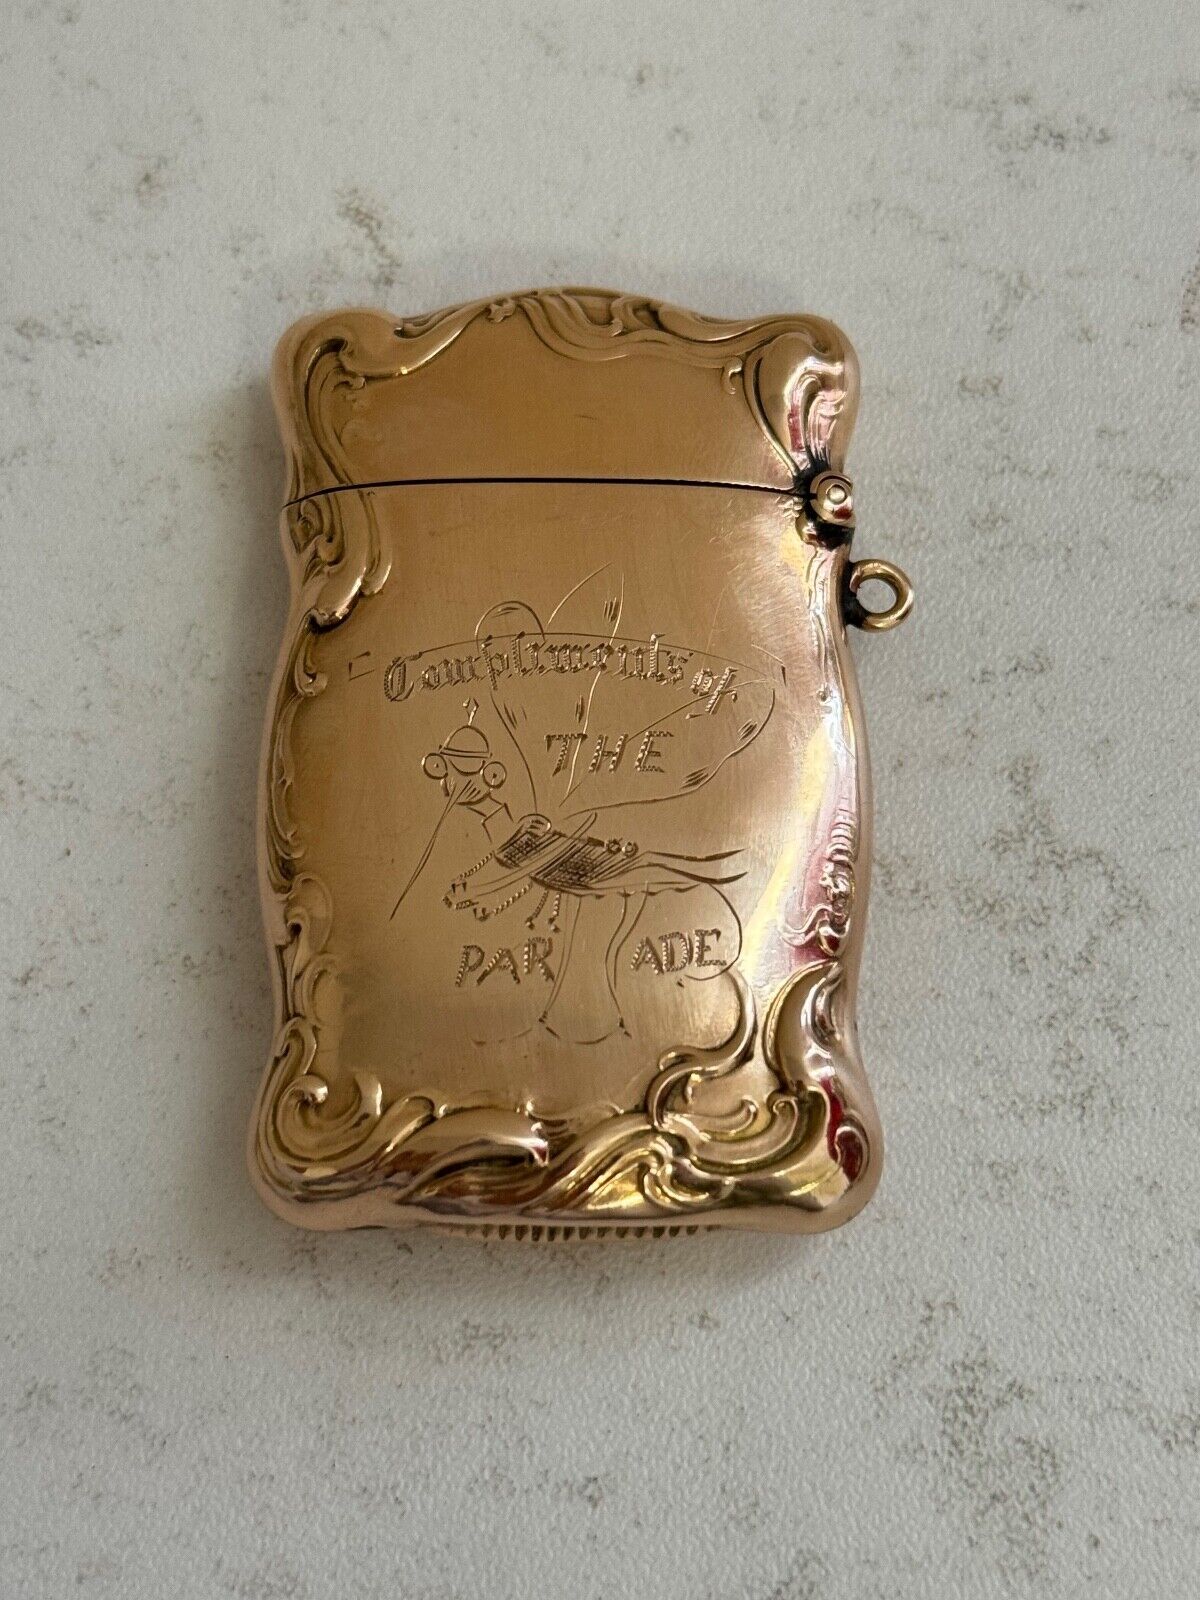 Antique 10k Gold Match Safe Engraved Compliments of Parade w/ Animal / Mosquito